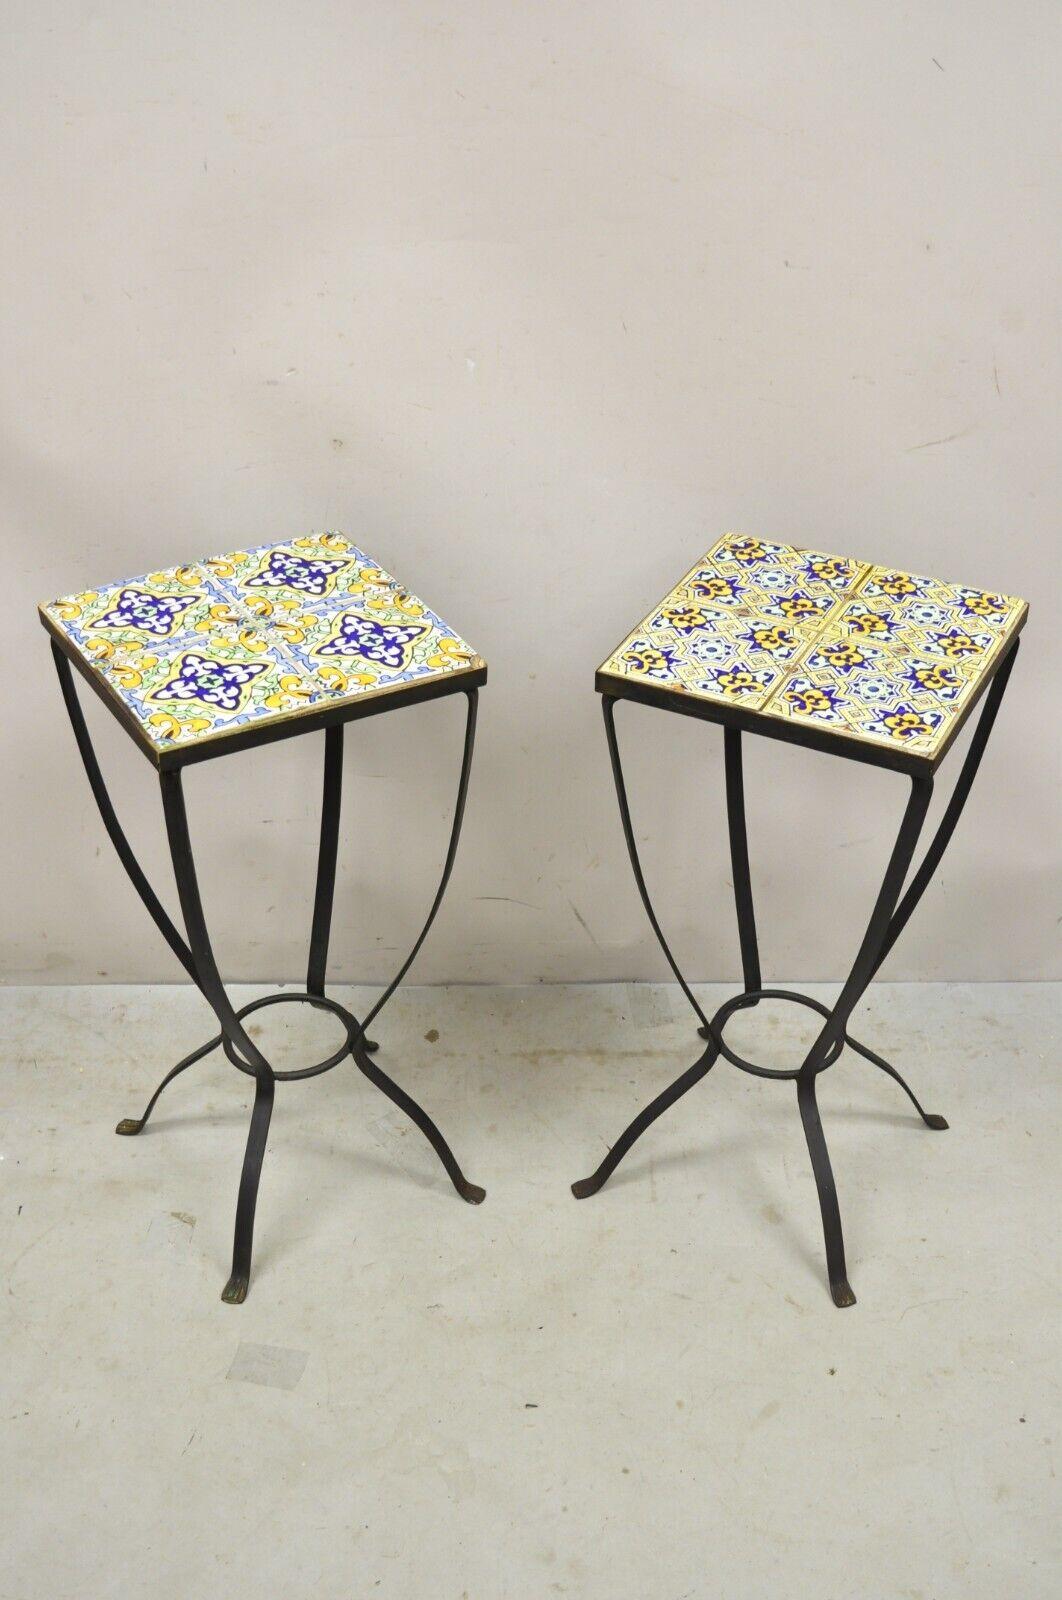 Vintage Arts & Crafts Style Yellow Blue Tile Top Iron Plant Stand Side Table - Pair. Item features a wrought iron base, mosaic tile tops, very nice vintage pair, great style and form. Circa Late 20th Century. Measurements: 26